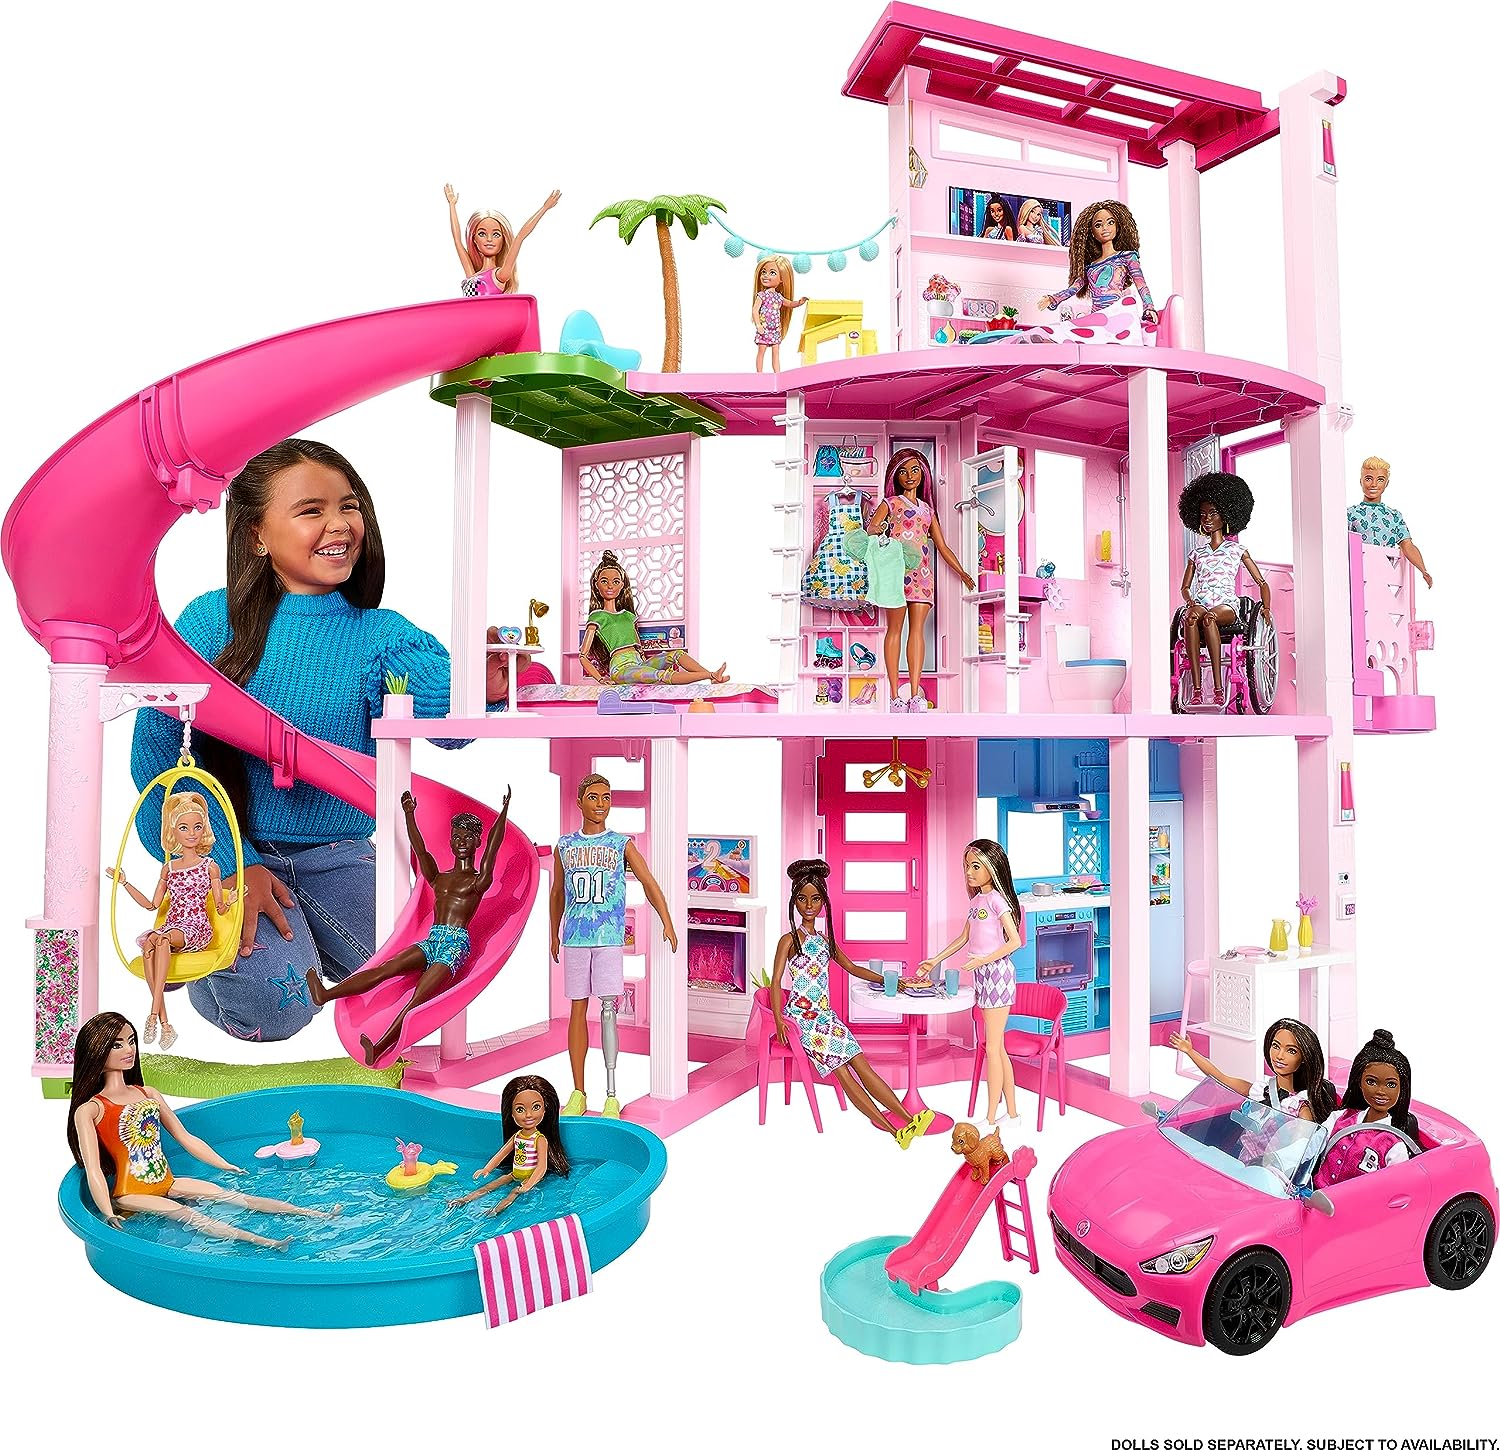 The Barbie Dreamhouse Black Friday sale is live at Amazon GoodtoKnow